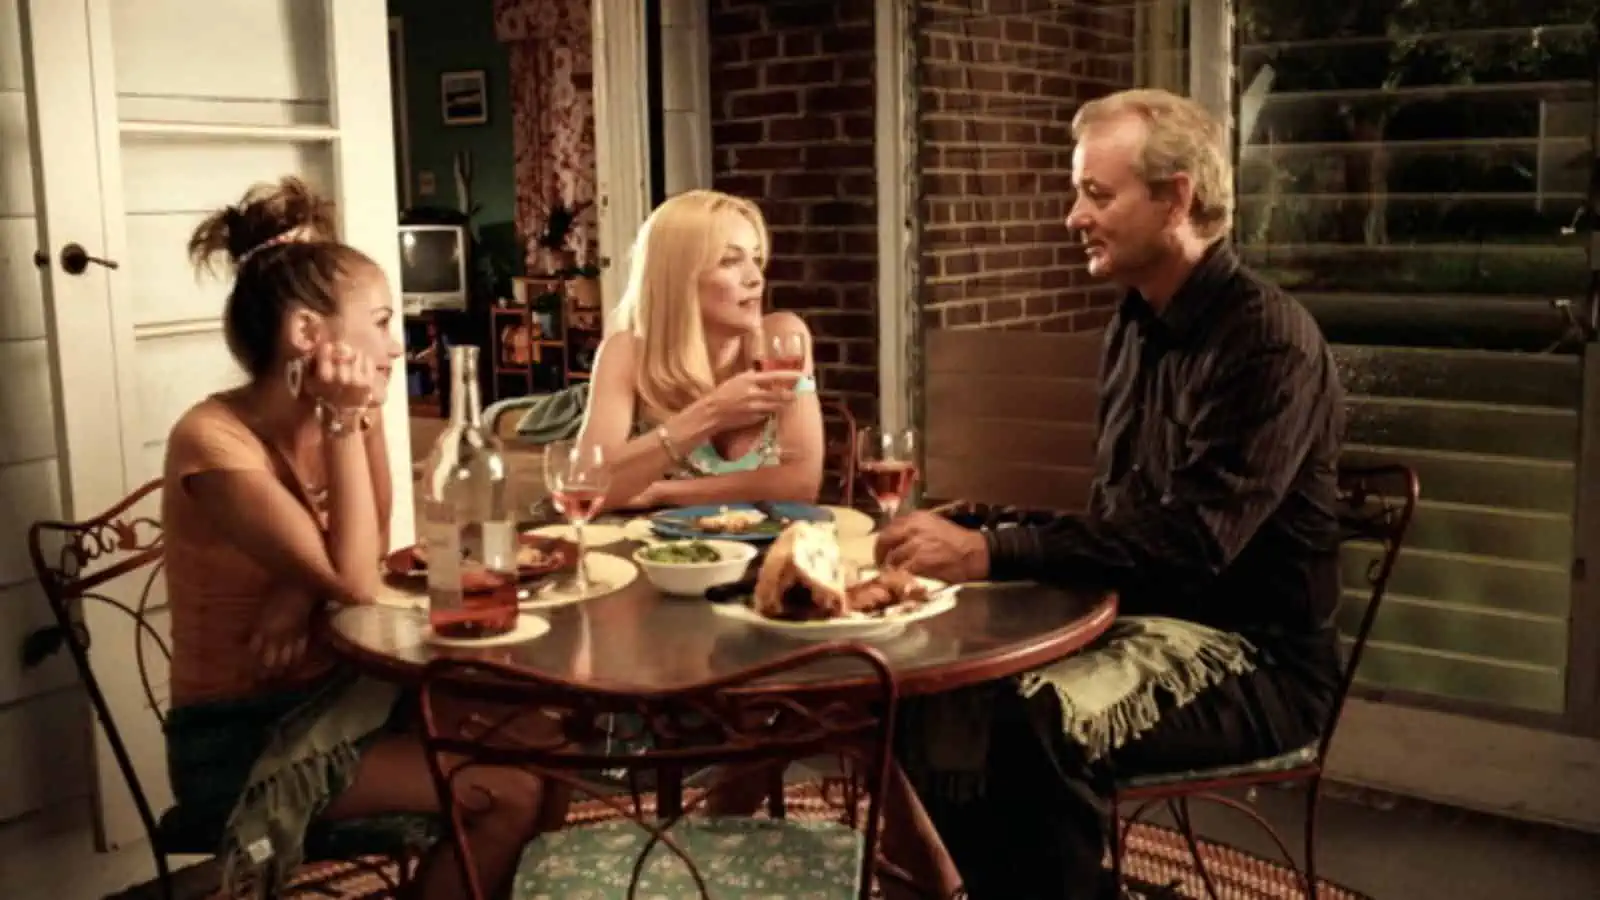 Broken Flowers [2005] : A Poignant Exploration of Love, Loss, and Self-Discovery